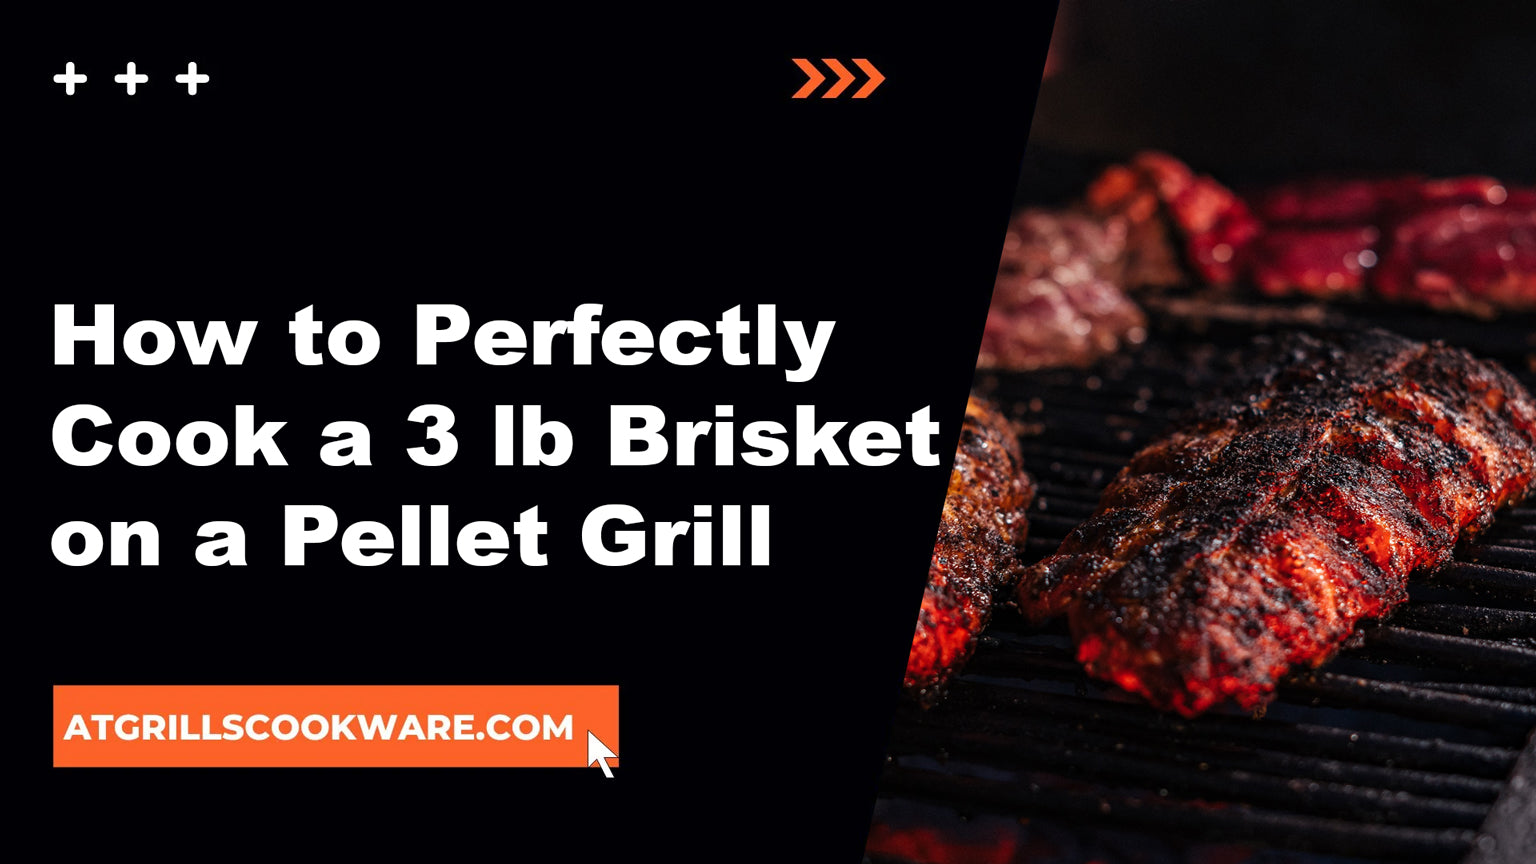 From Timber to Tender: Your Guide to Smoking a 3 lb Brisket to Perfection on a Pellet Grill